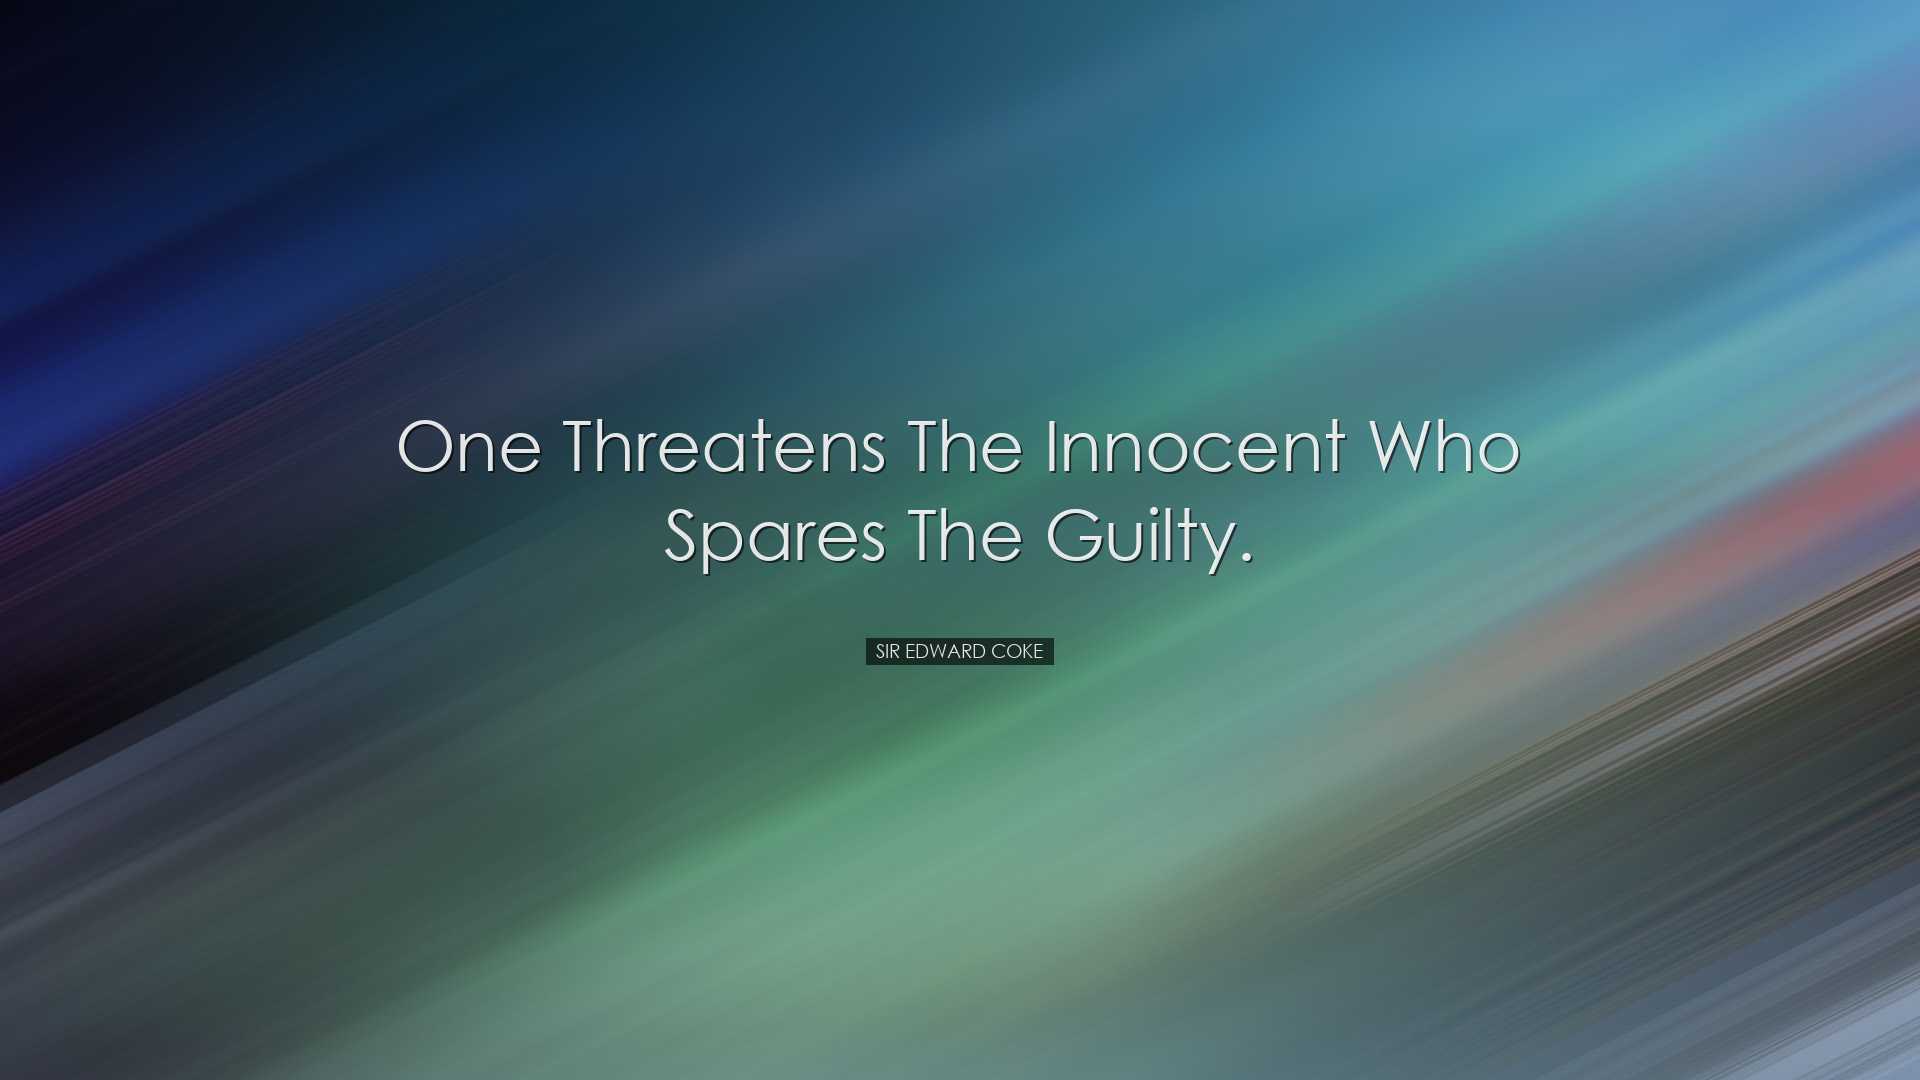 One threatens the innocent who spares the guilty. - Sir Edward Cok